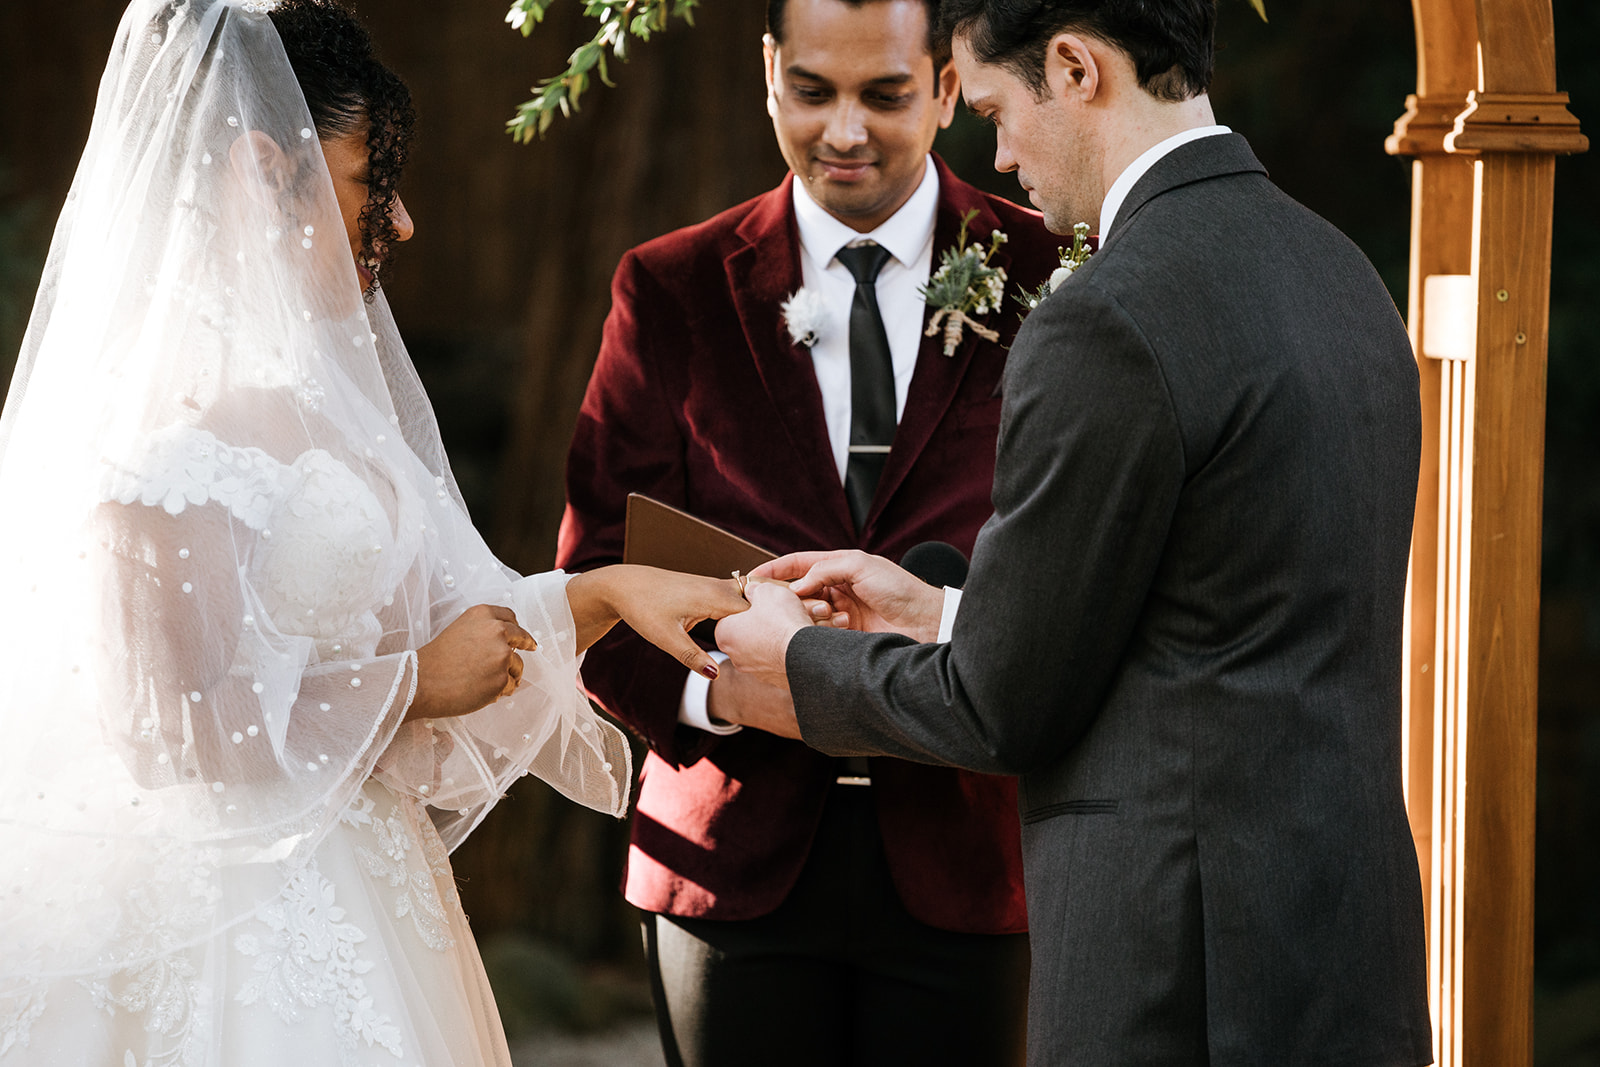 Bride and groom exchange rings during ceremony 